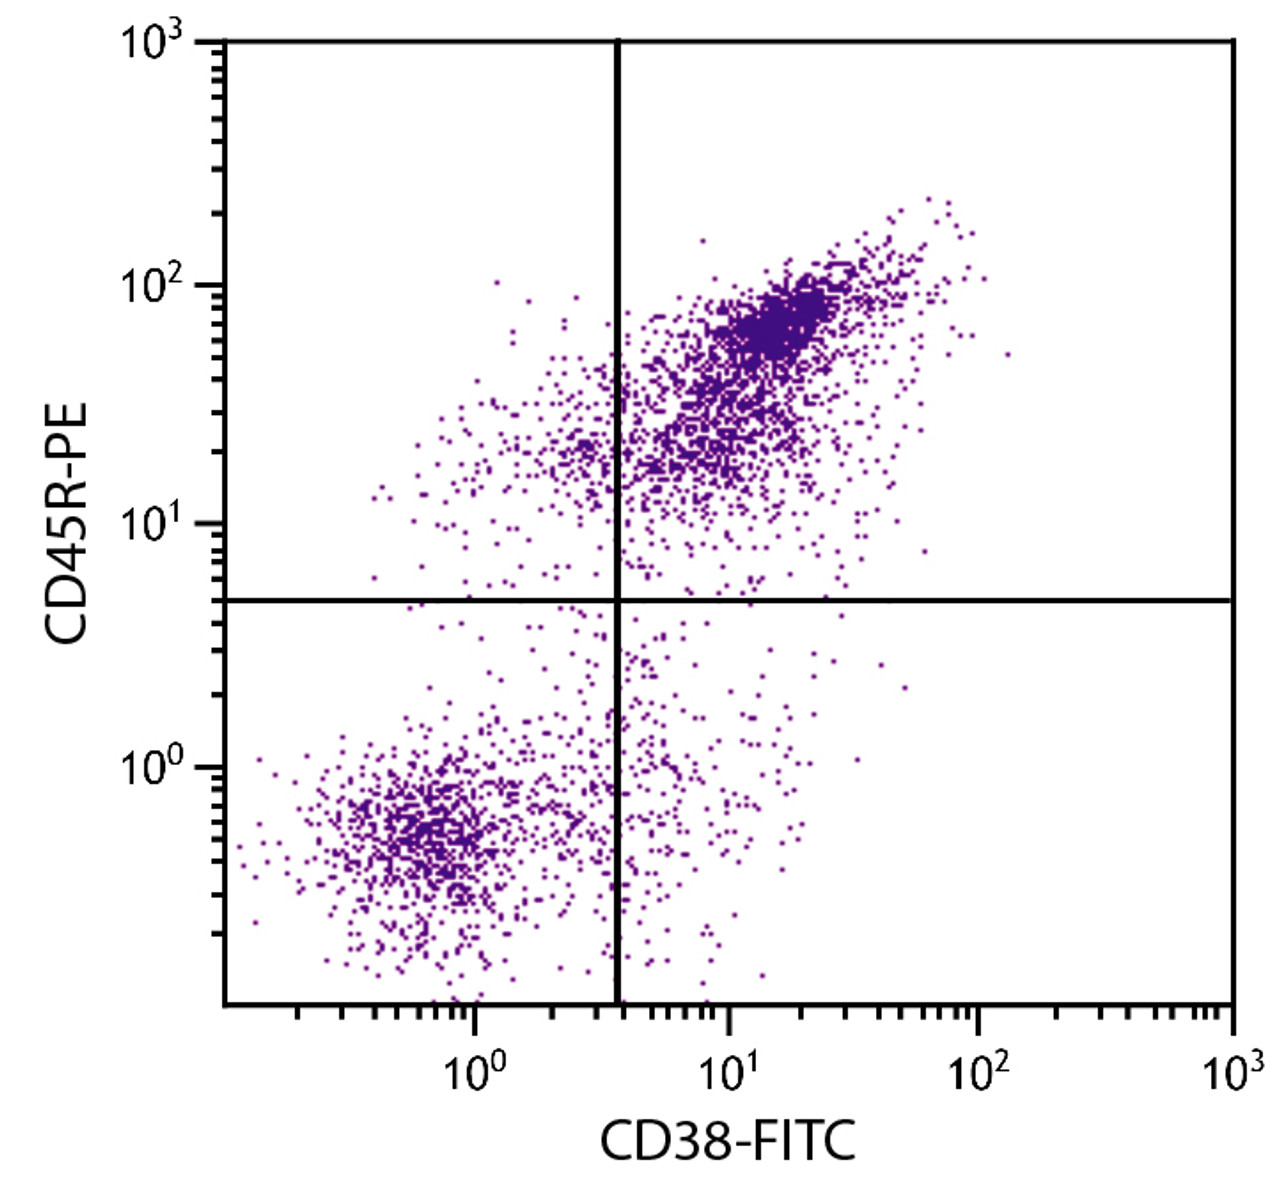 BALB/c mouse splenocytes were stained with Rat Anti-Mouse CD38-FITC (Cat. No. 98-749) and Rat Anti-Mouse CD45R-PE .